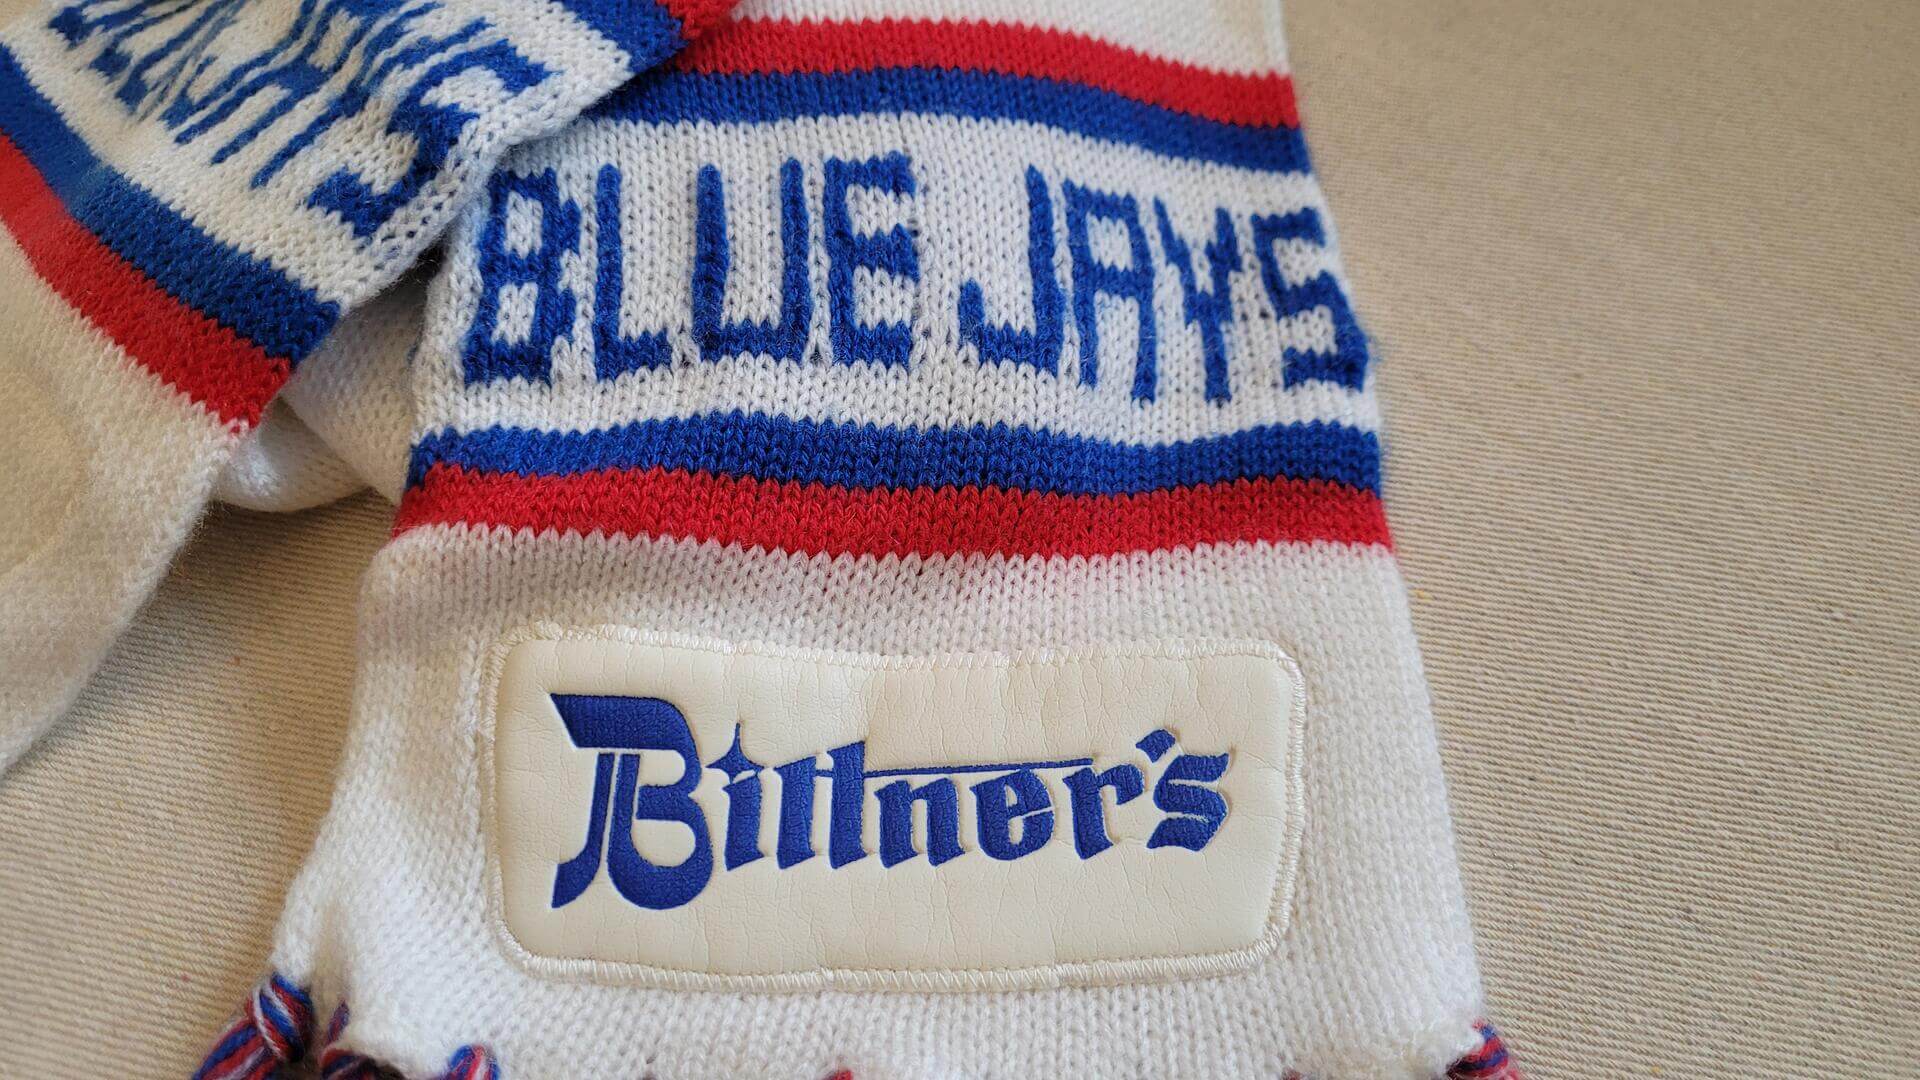 1970s vintage Toronto Blue Jays promotional knitted fringed scarf by Bittner's. Rare collectible made in Canada baseball sports memorabilia and winter wear